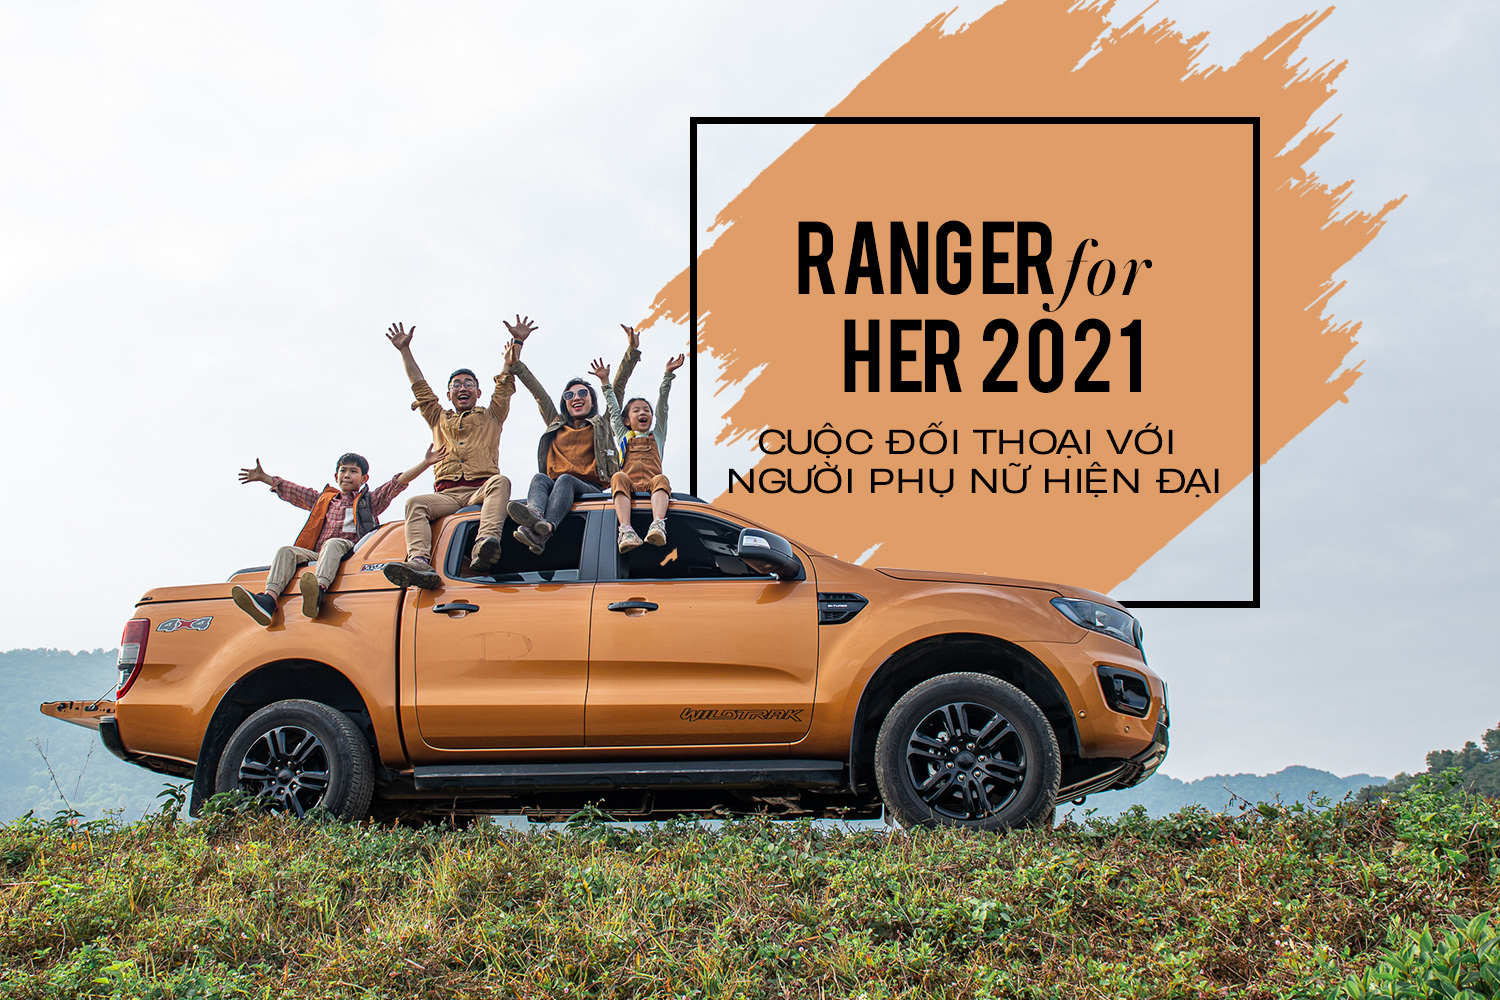 Ford Ranger for her 2021 - phụ nữ sau tay tái